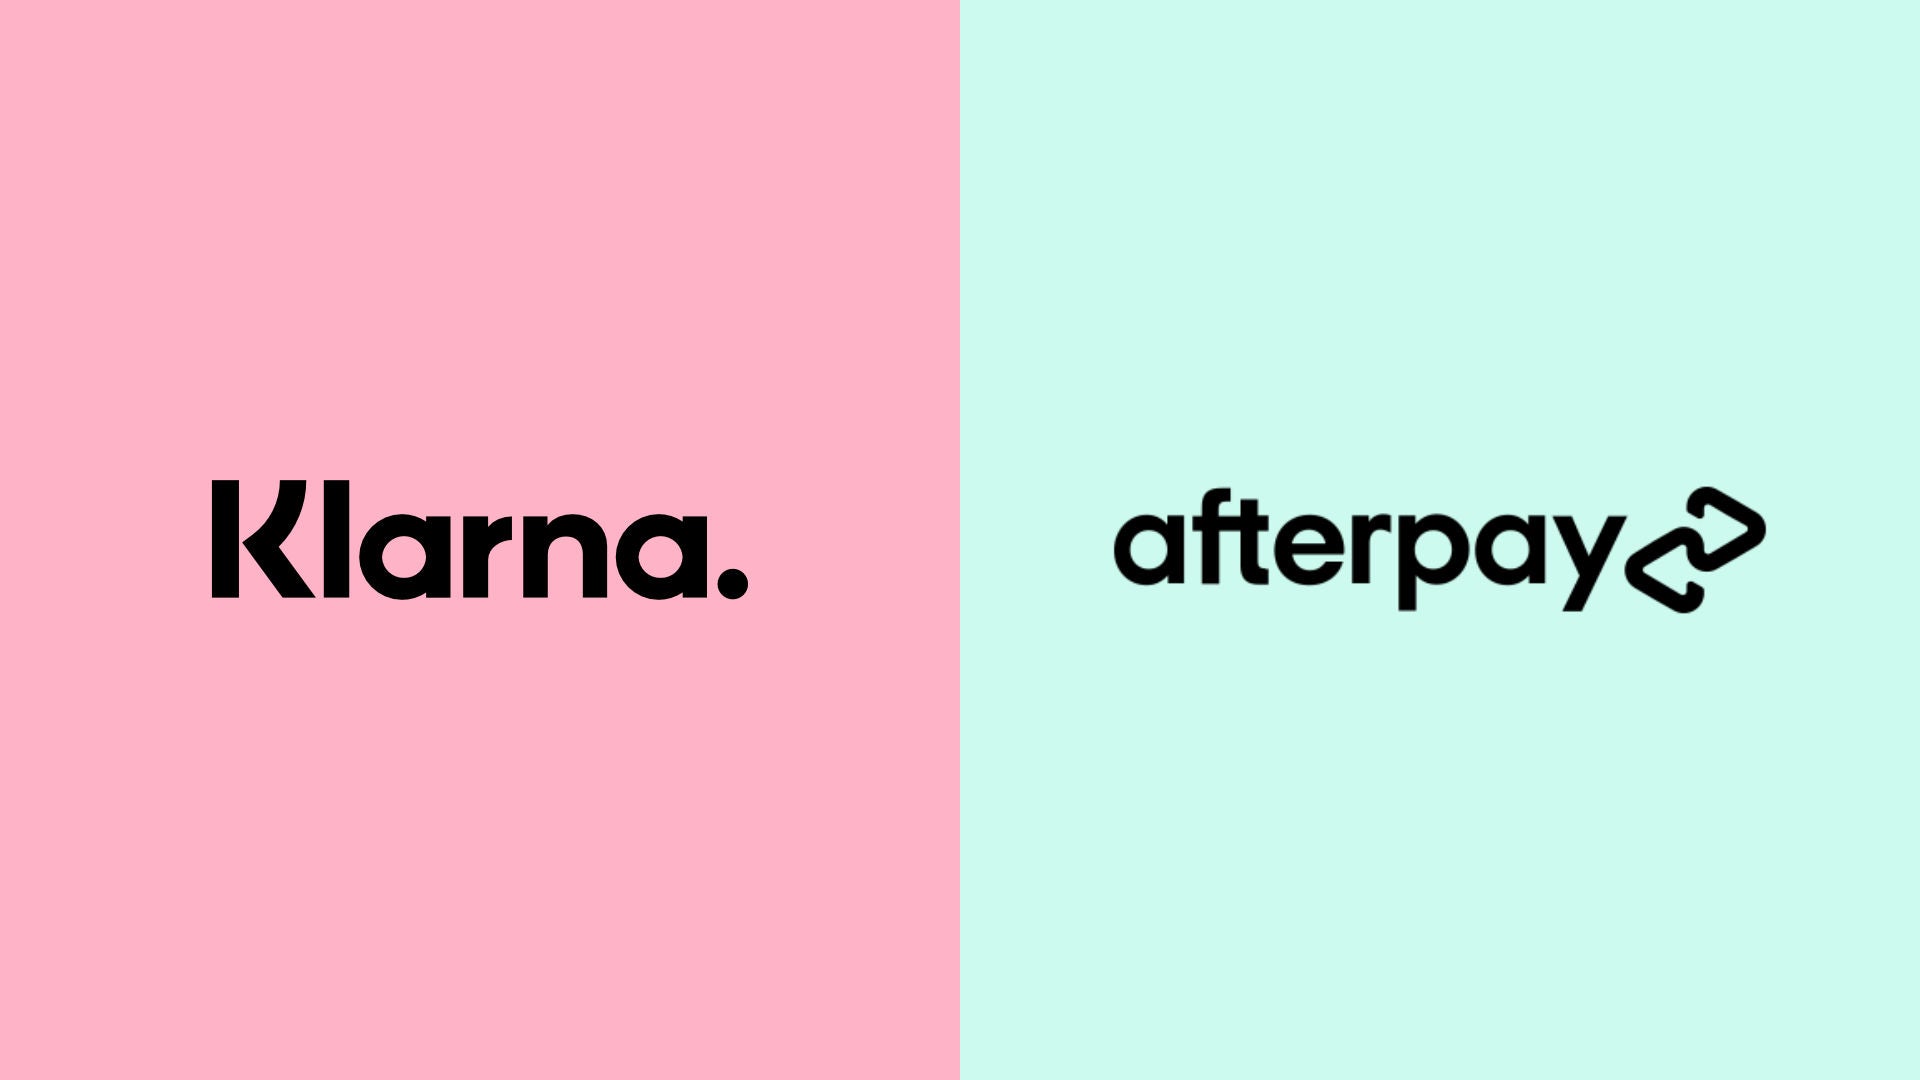 Pay in 4 payments with Klarna and Afterpay! – TAIKORA by Stephen Hogan